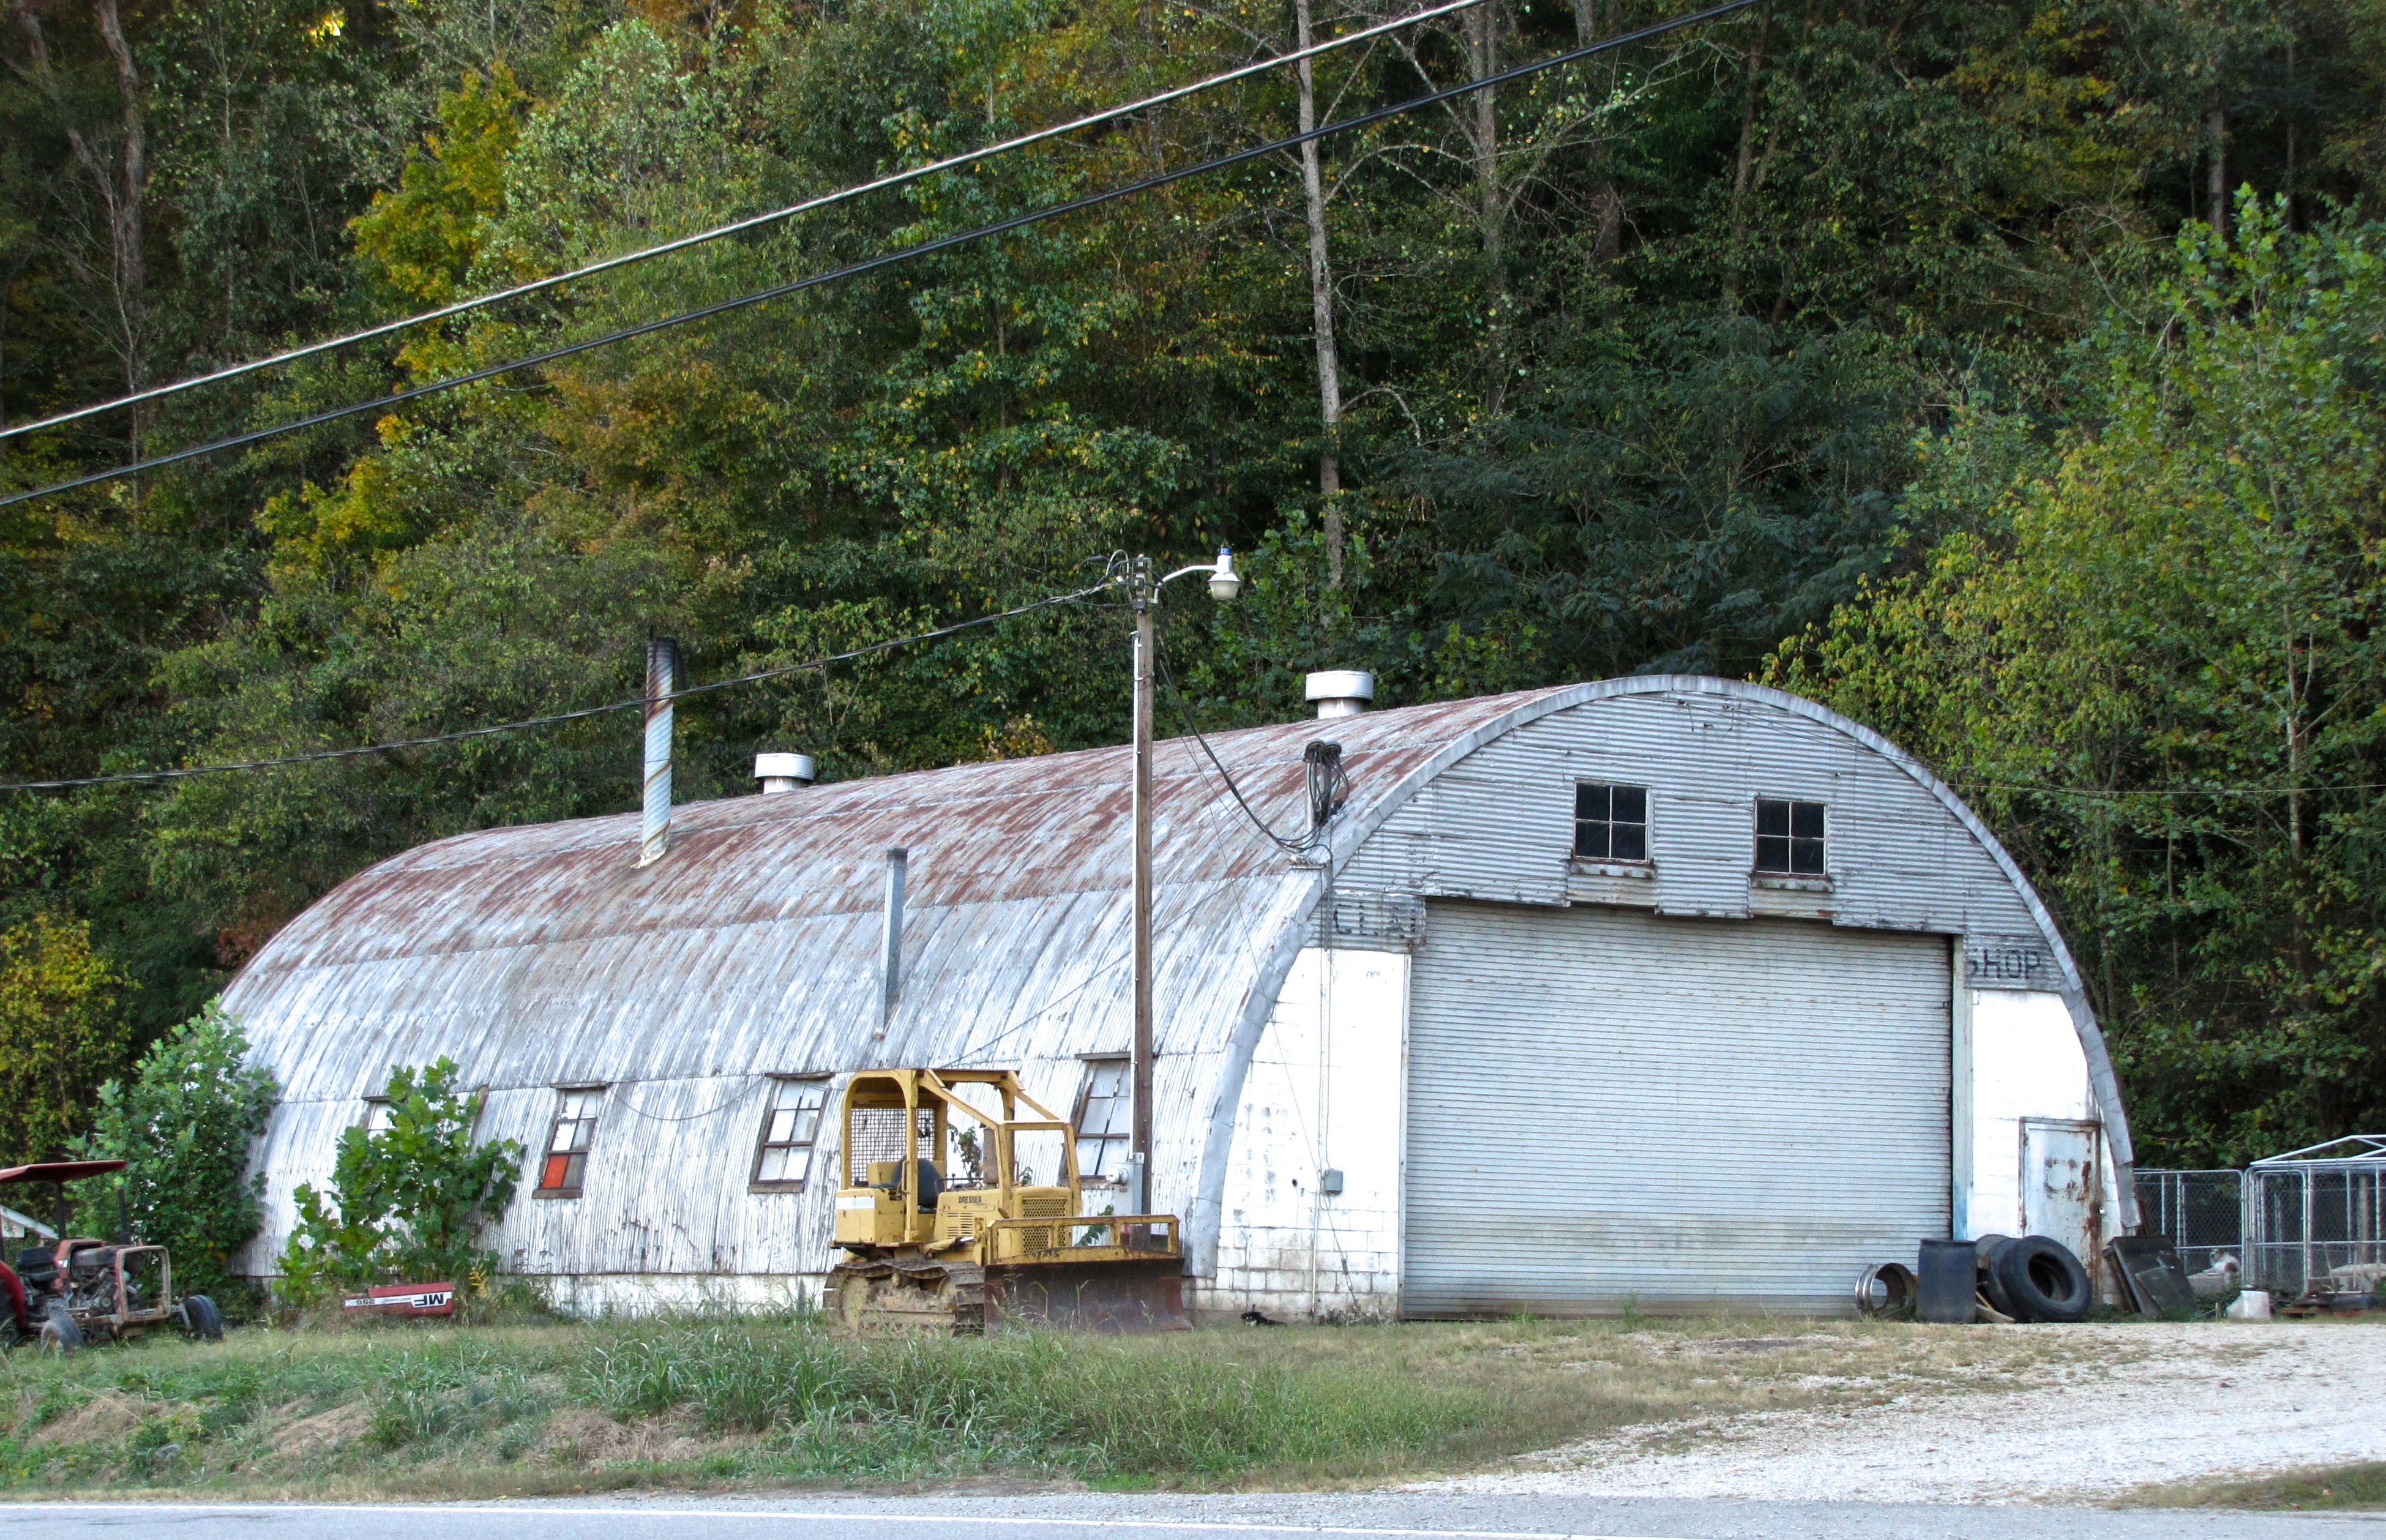 quonset hut in Privacy Policy, IL